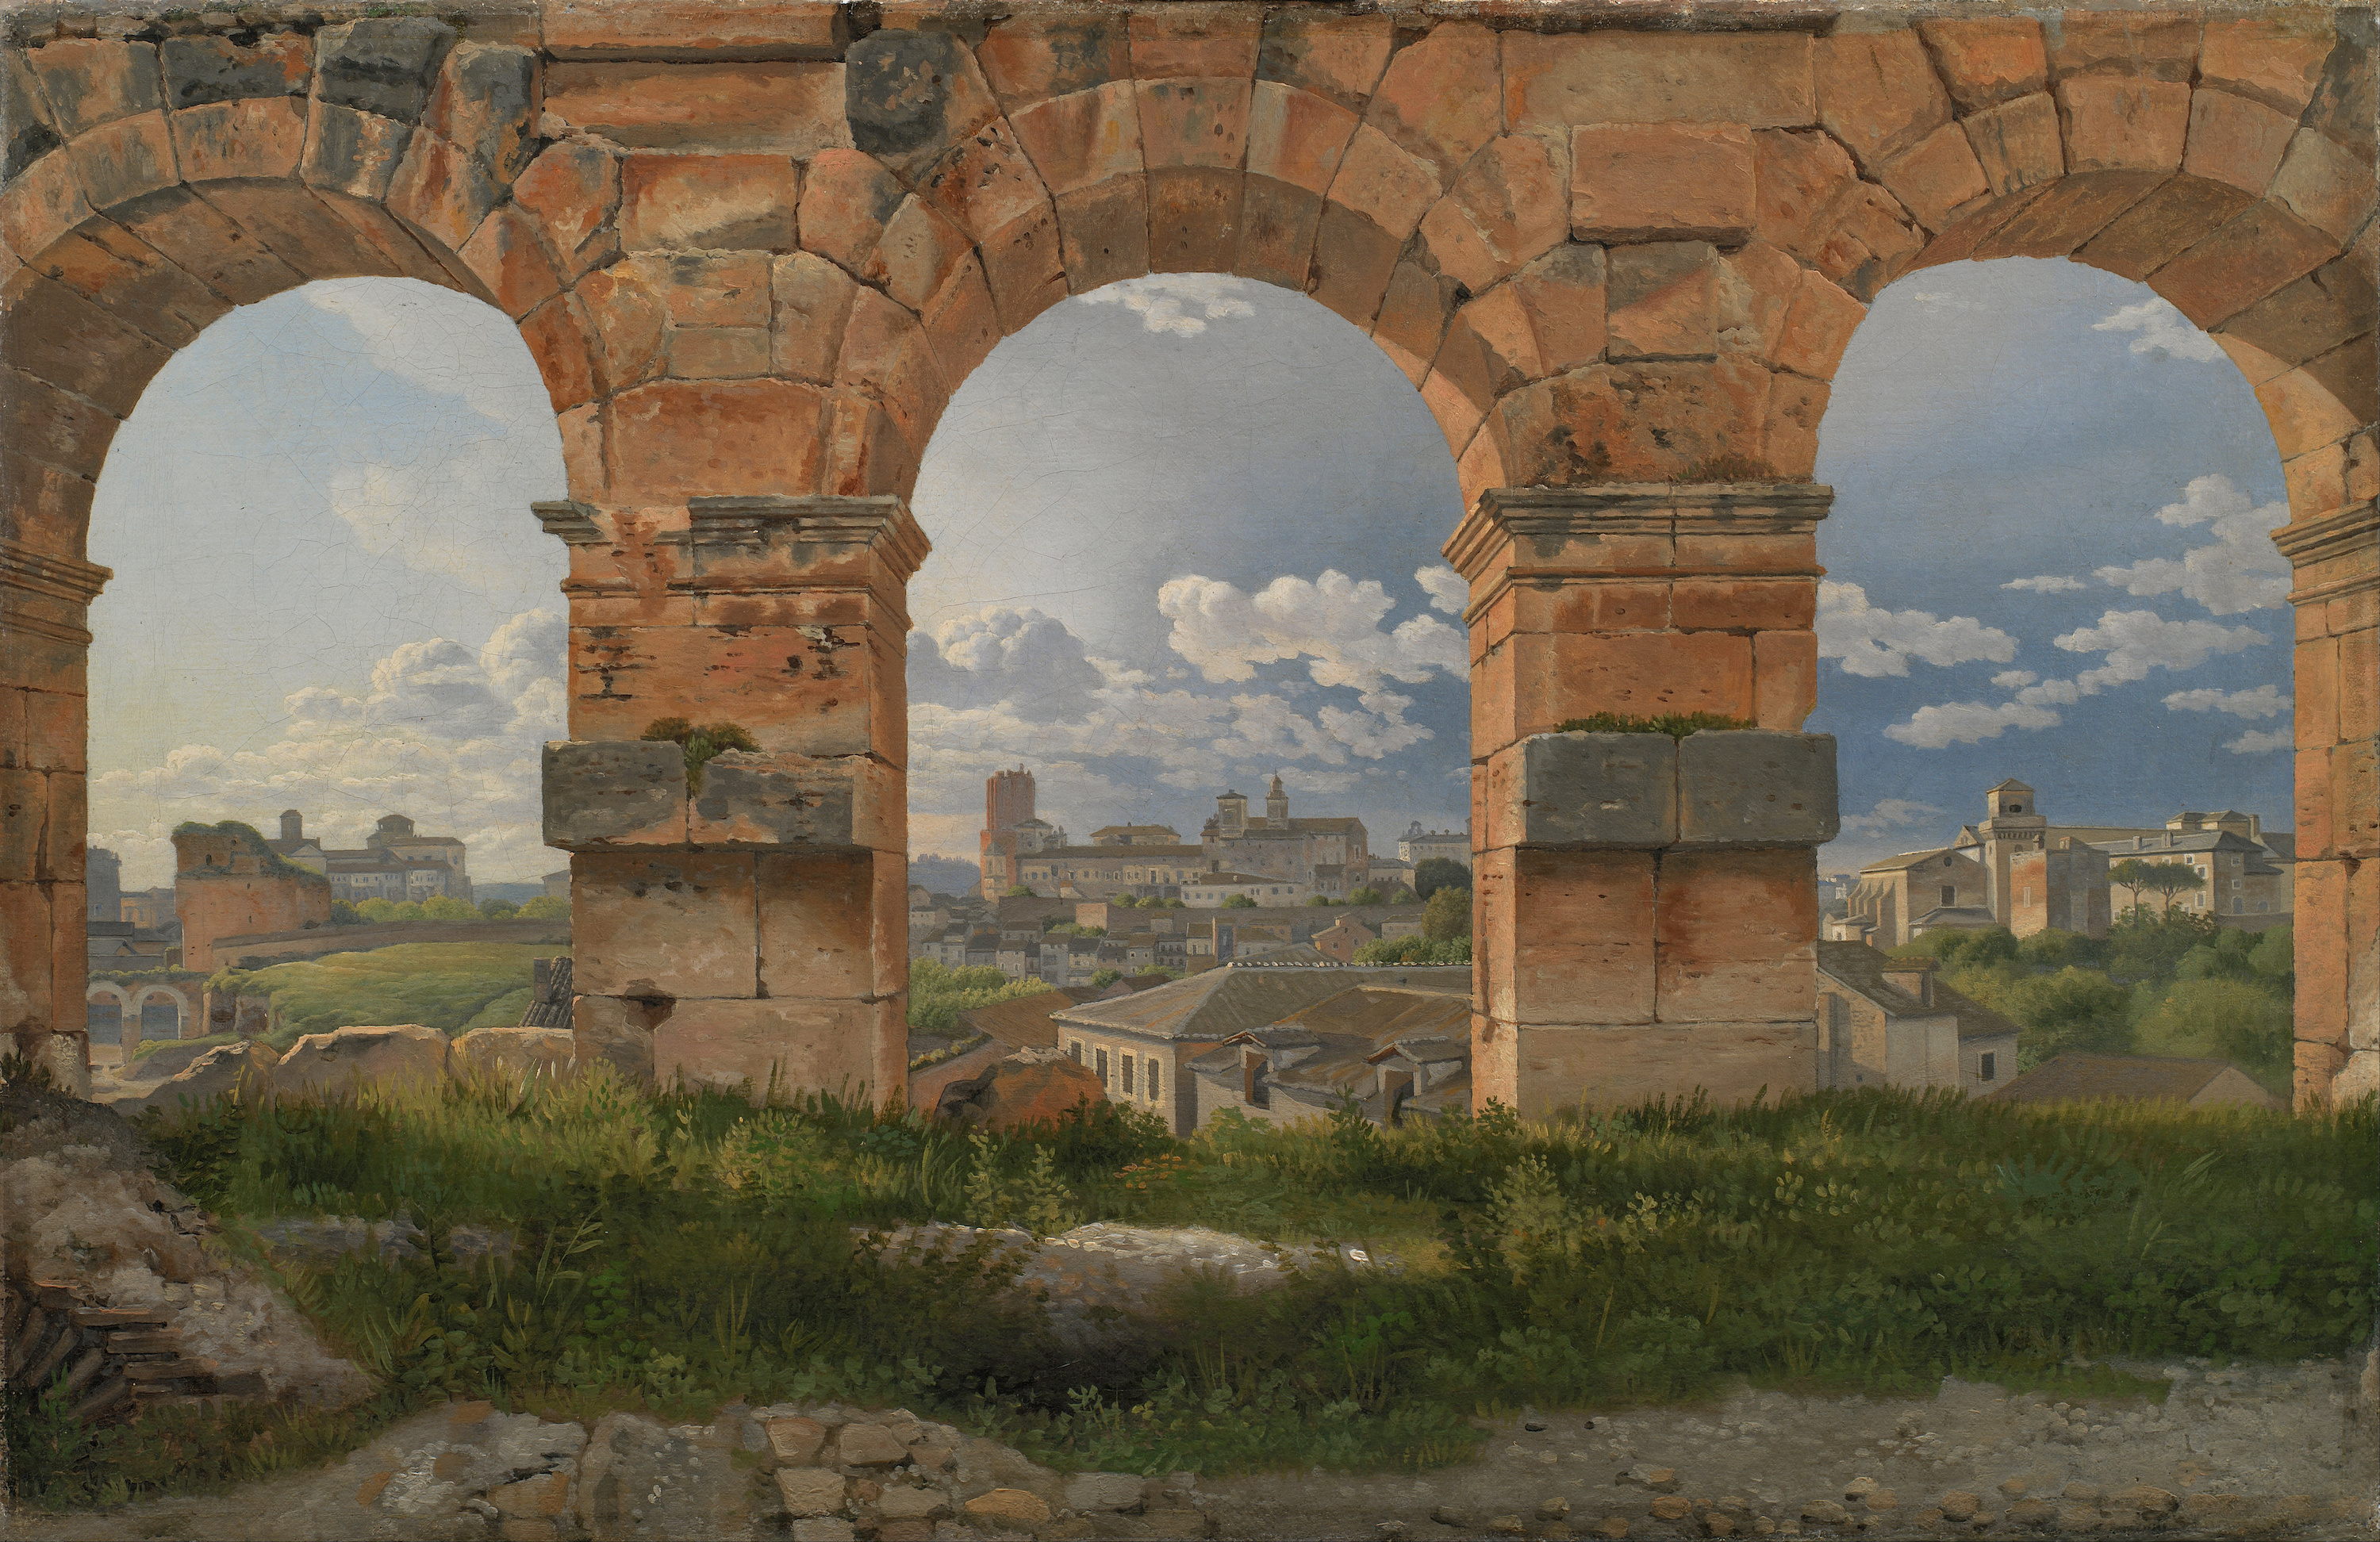 A View through Three of the North-Western Arches of the Third Storey of the Colosseum by C.W. Eckersberg - 1815-1816 - 32 × 49.5 cm Statens Museum for Kunst